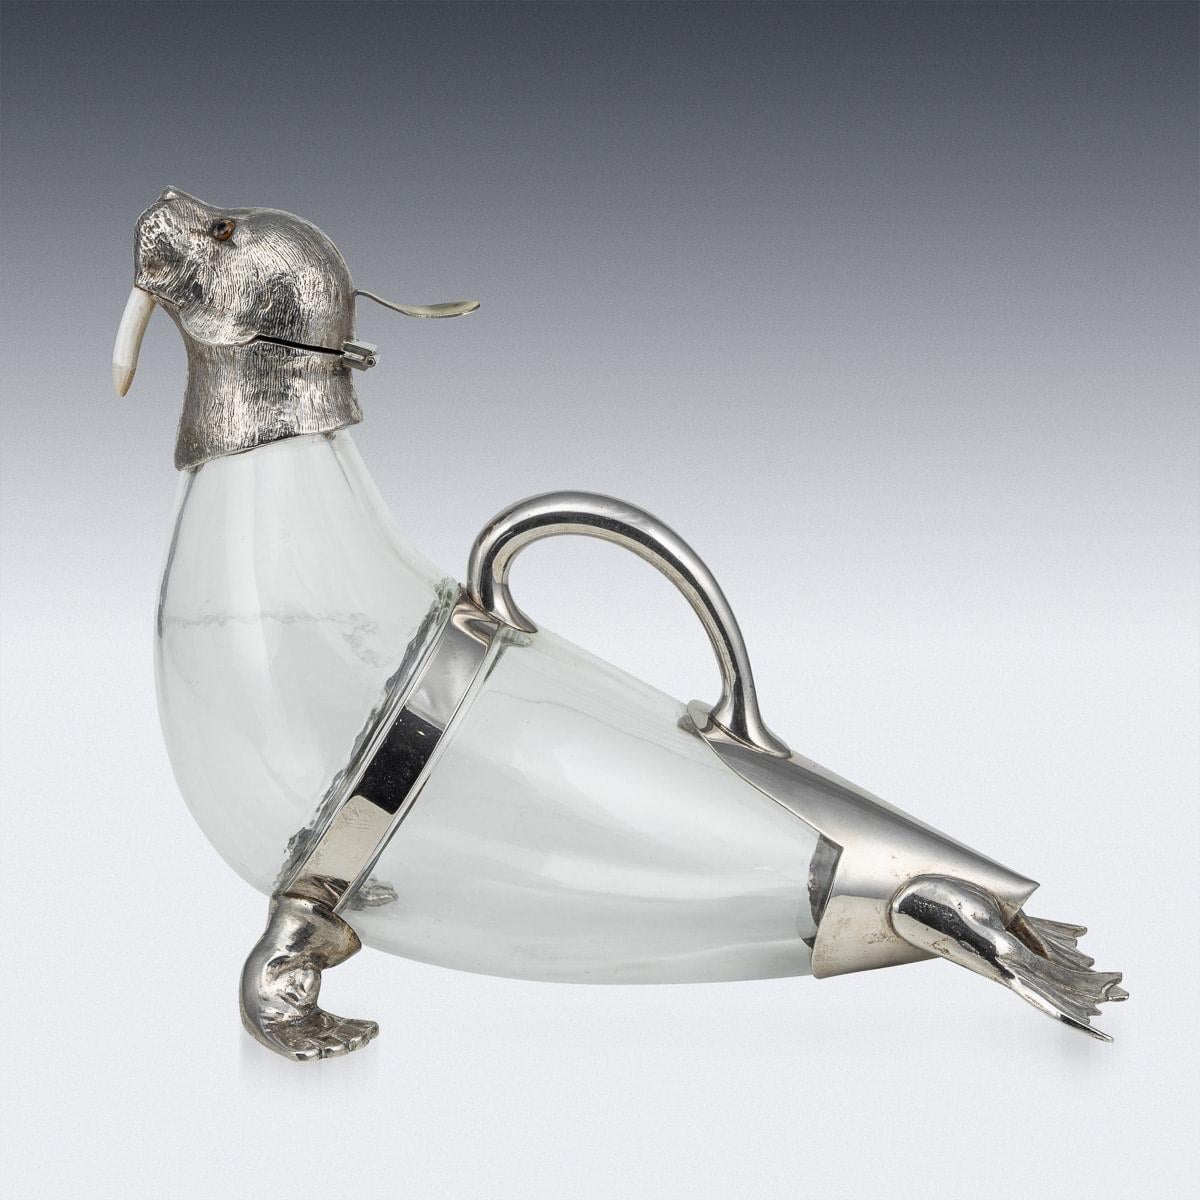 Antique 19th Century Victorian zoomorphic silver-plated and glass walrus wine jug is a true marvel of artistry and craftsmanship. This stunning piece seamlessly blends the elegance of silver with the delicacy of glass, resulting in a wine jug that